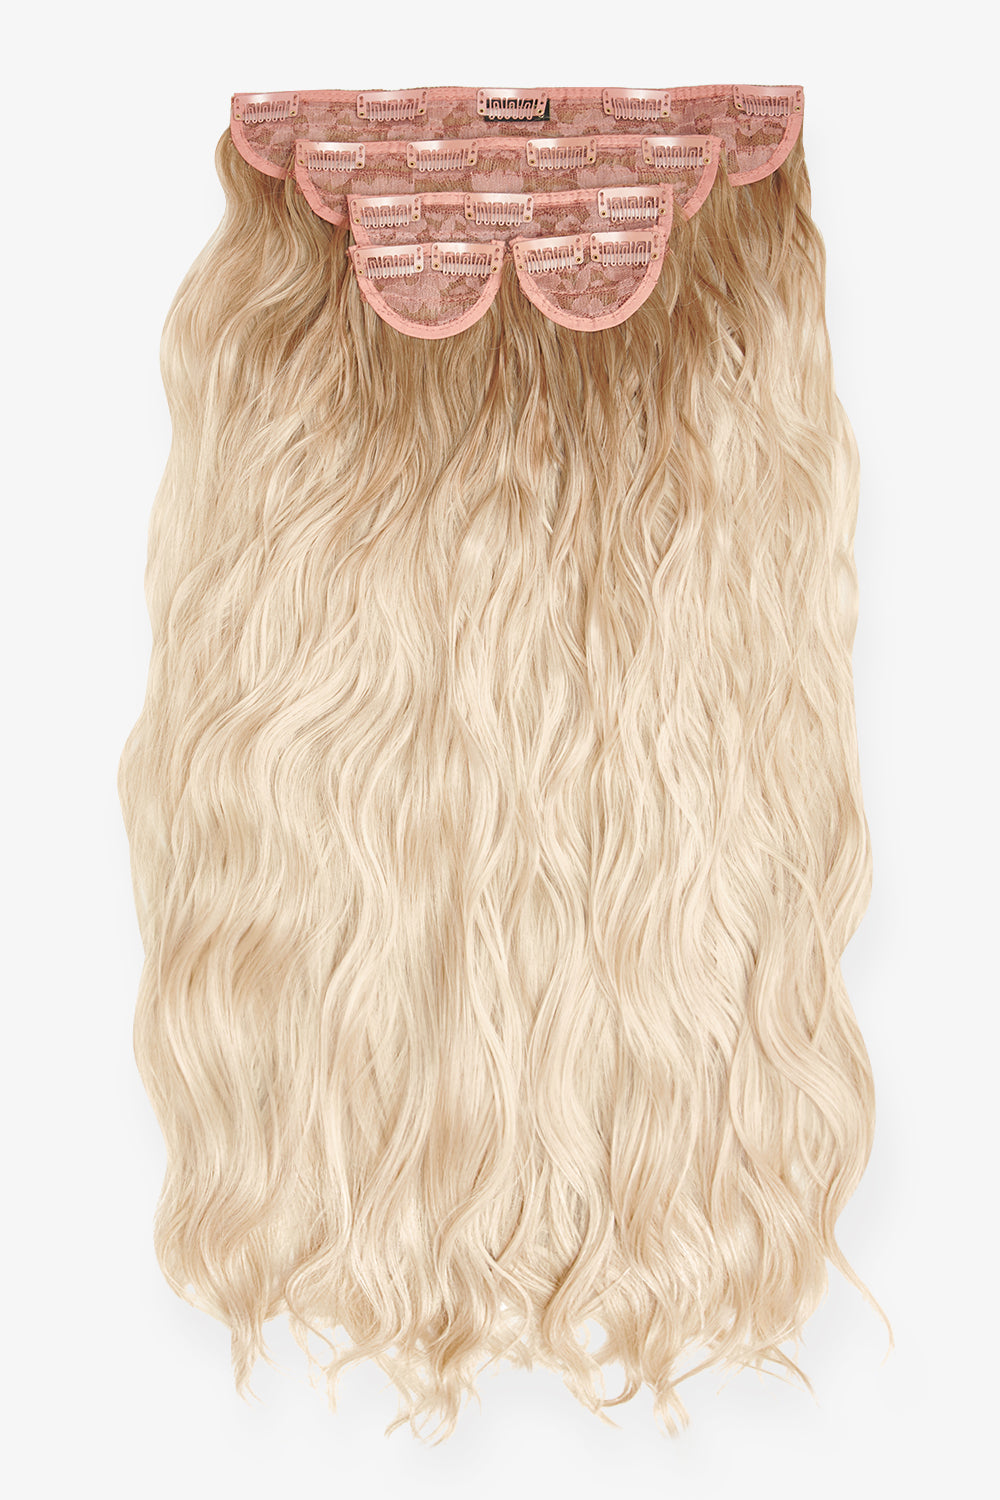 Super Thick 26" 5 Piece Waist Length Wave Clip In Hair Extensions - LullaBellz  - Rooted Light Blonde